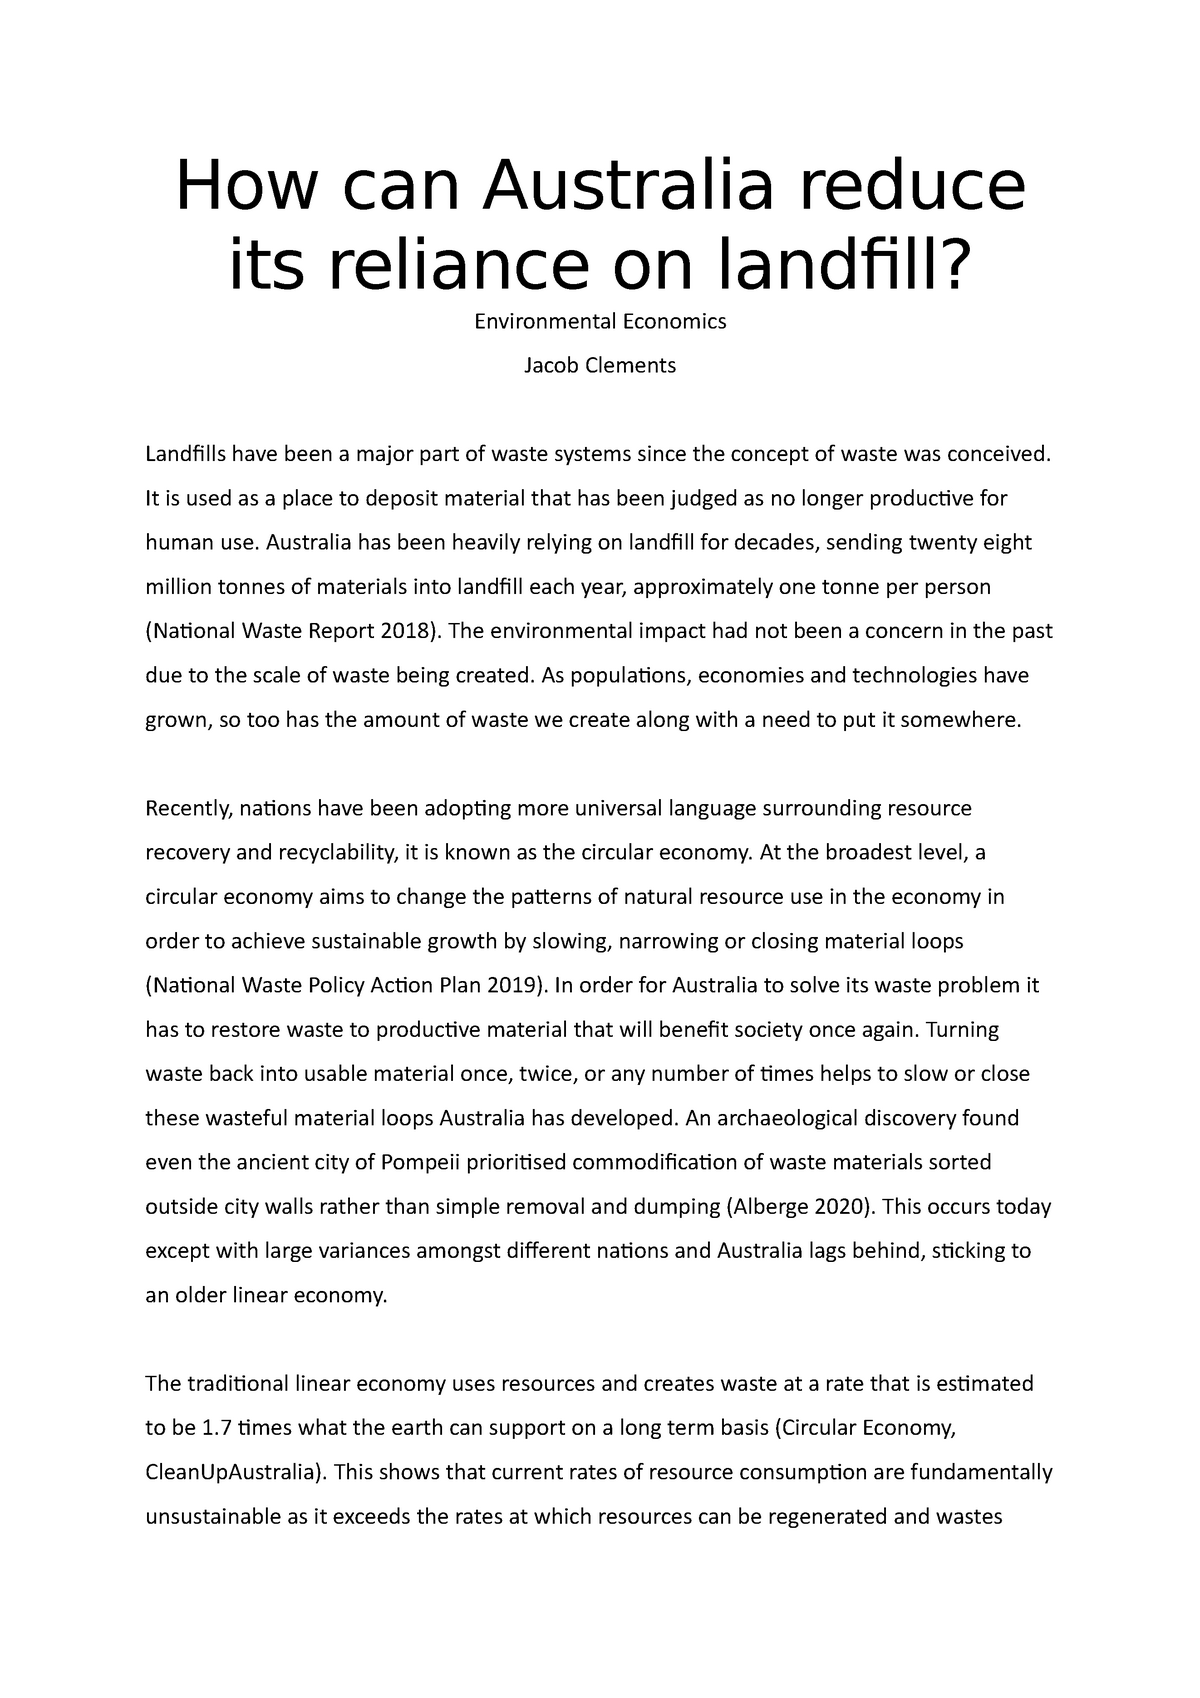 essay on the waste land